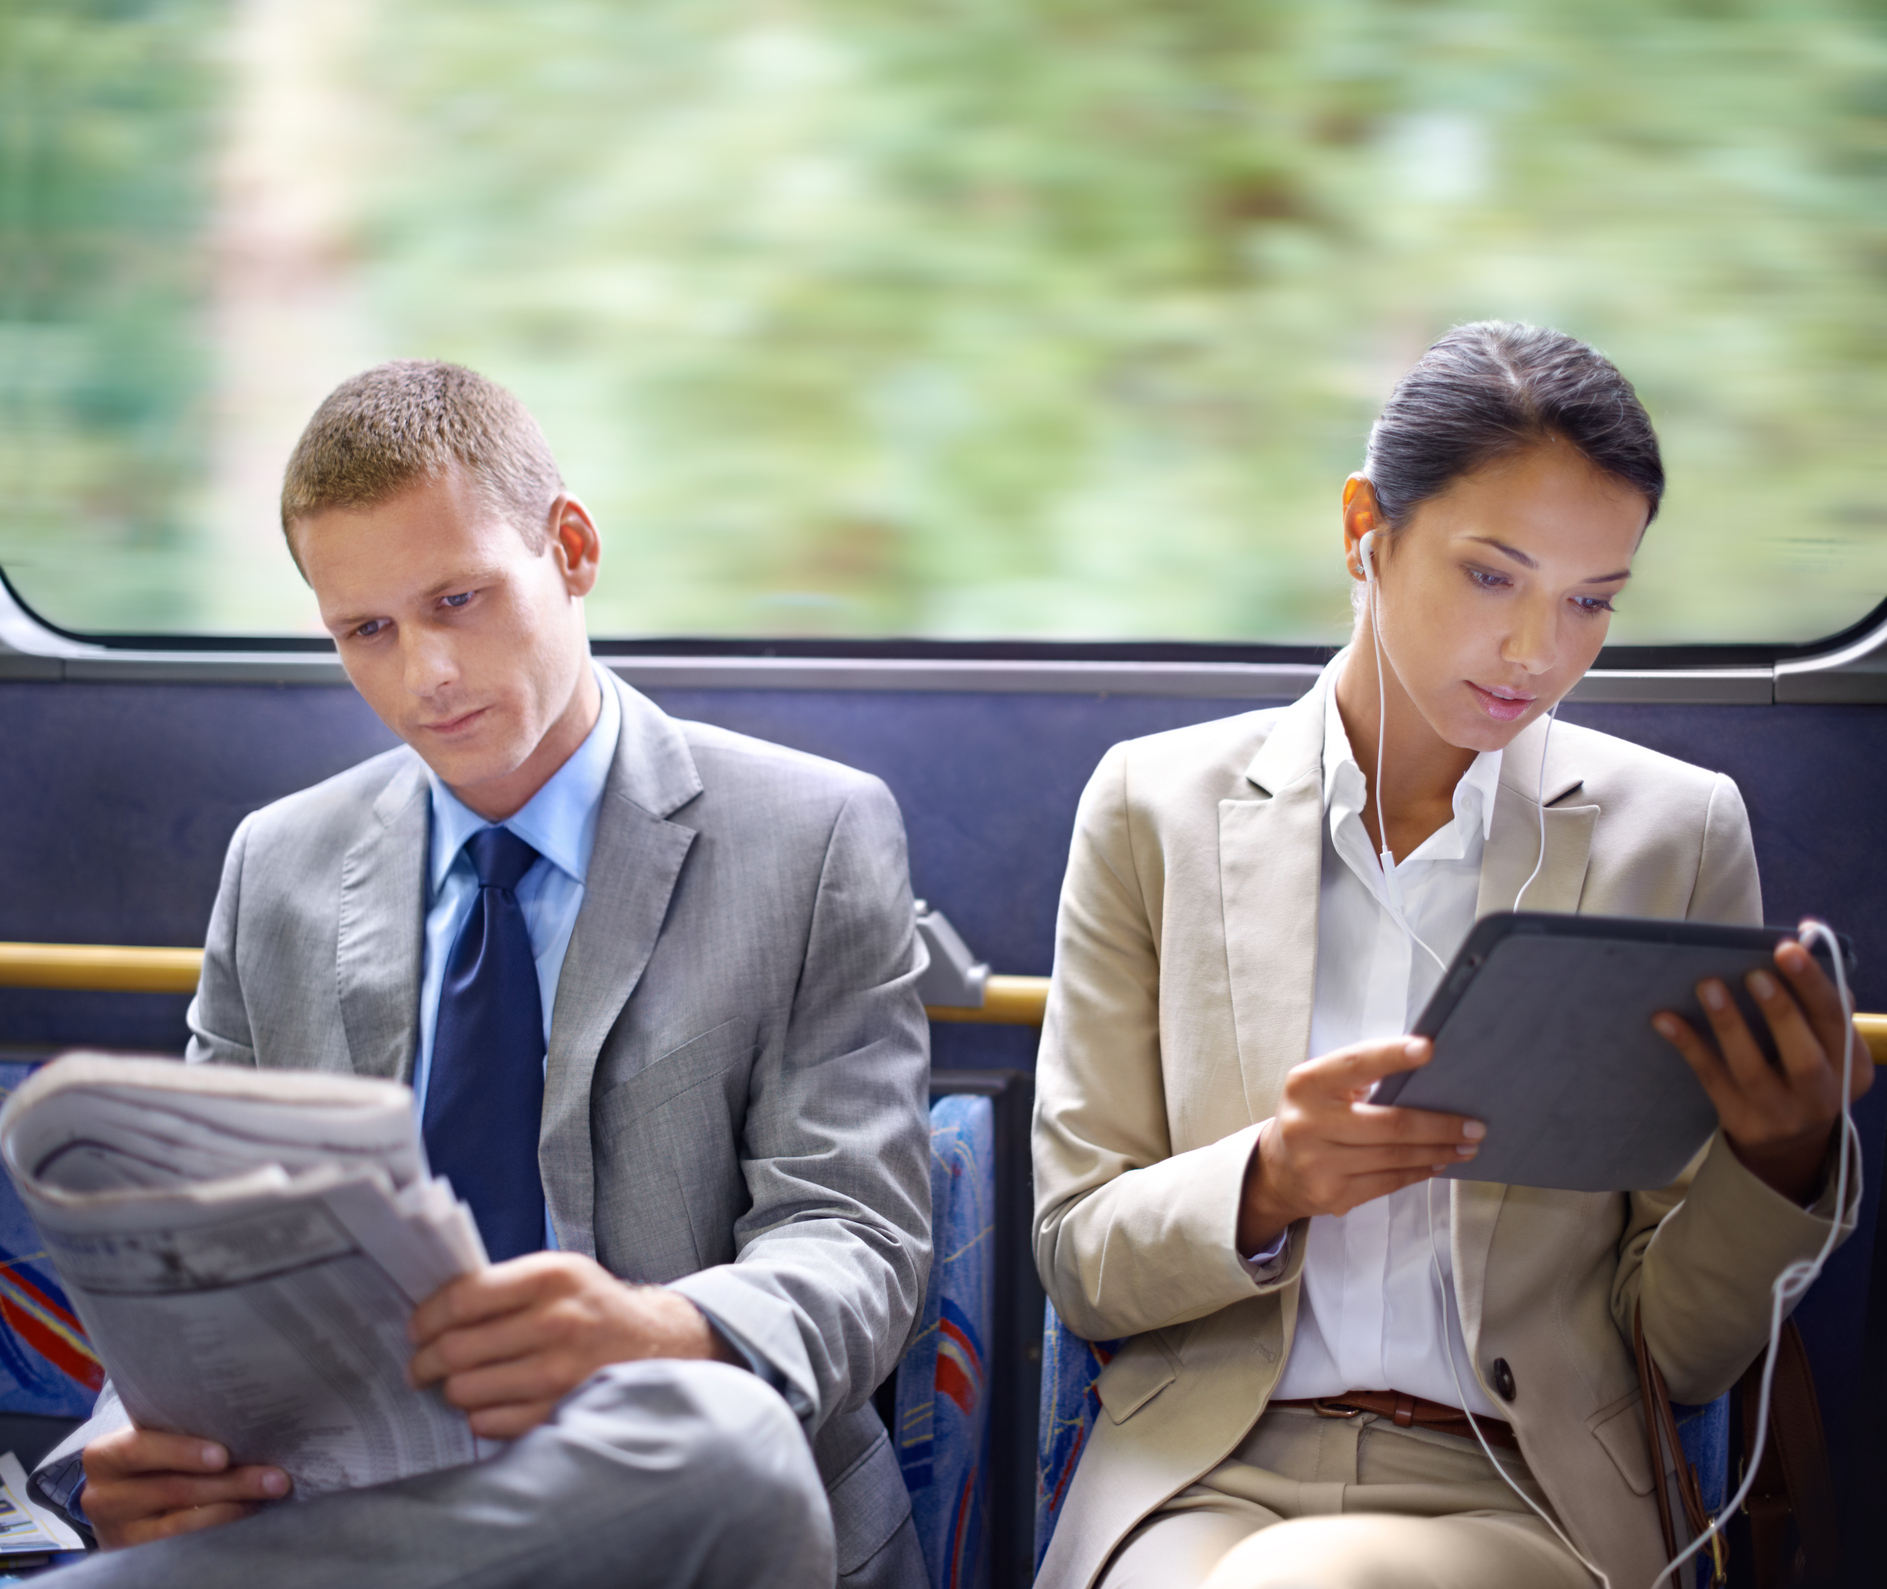 Two business people reading catching up on the news on their commute to work